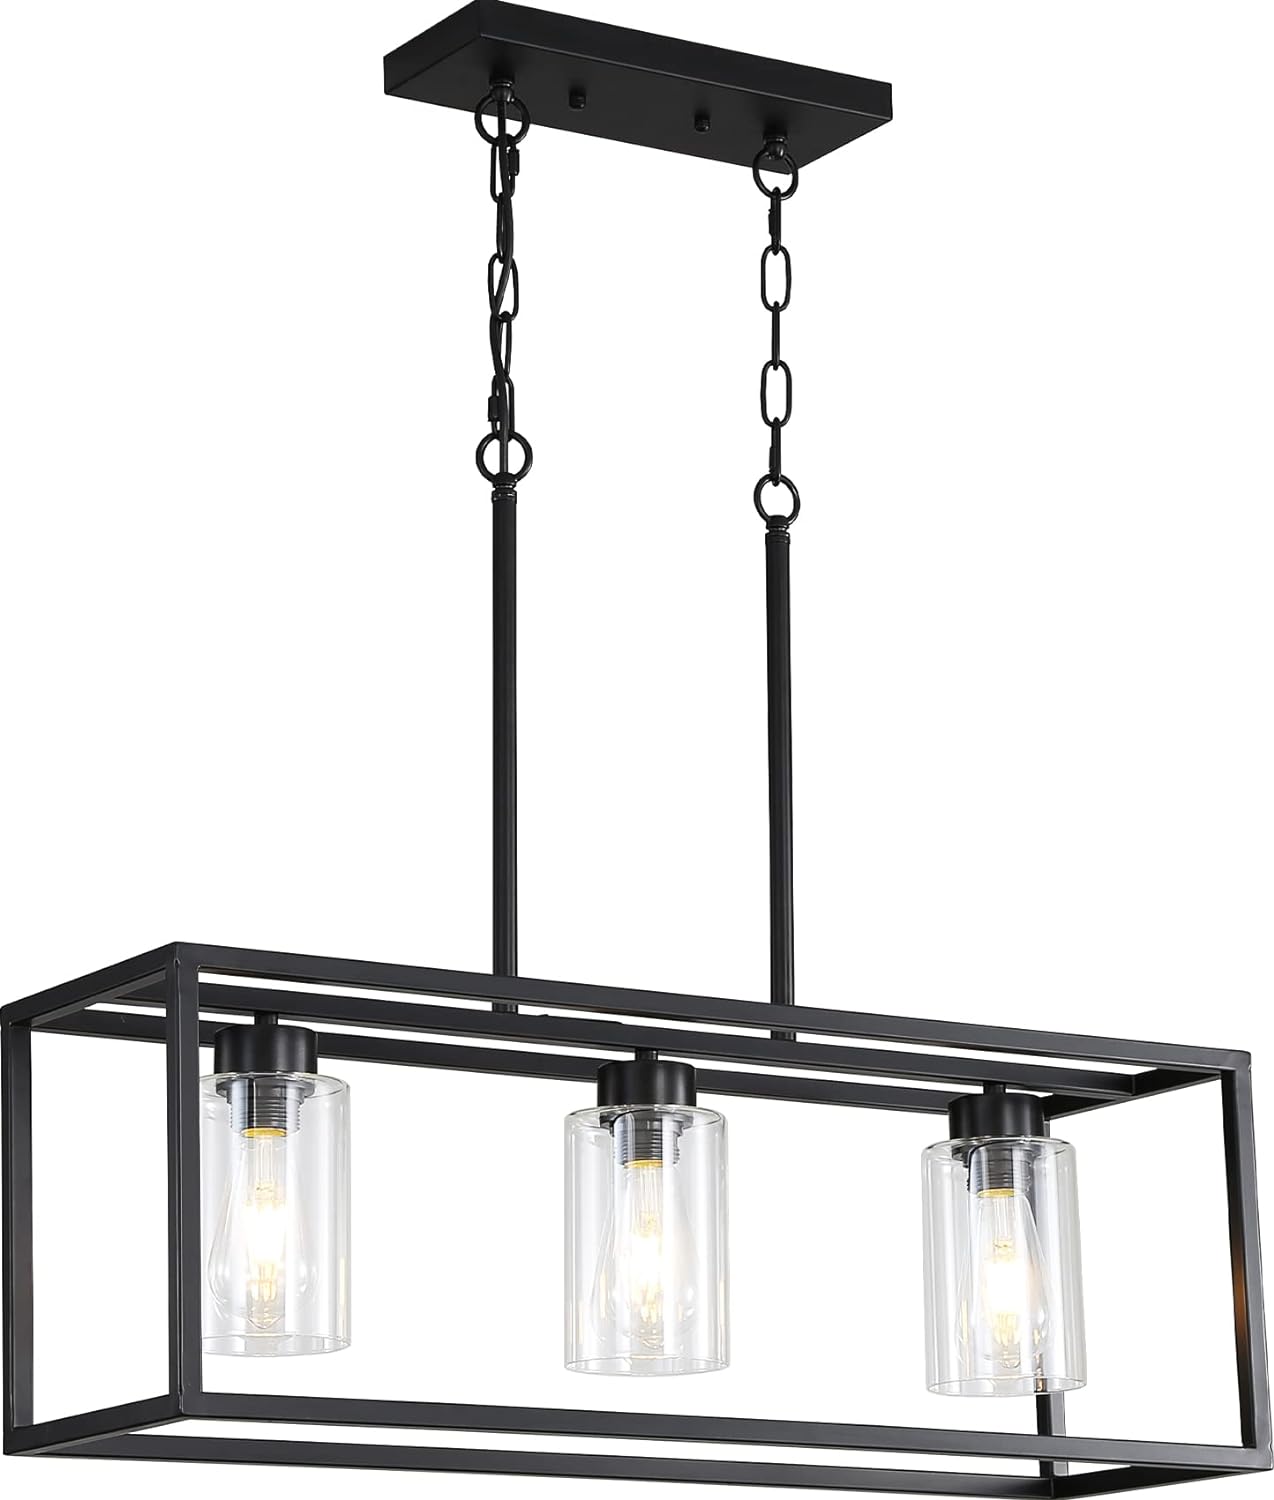 Black 3-Light Dining Room Light Fixture, Modern Farmhouse Chandeliers, Linear Rectangular Kitchen Island Lighting, Industrial Vintage Pendant Lighting with Clear Glass Shade Height Adjustable